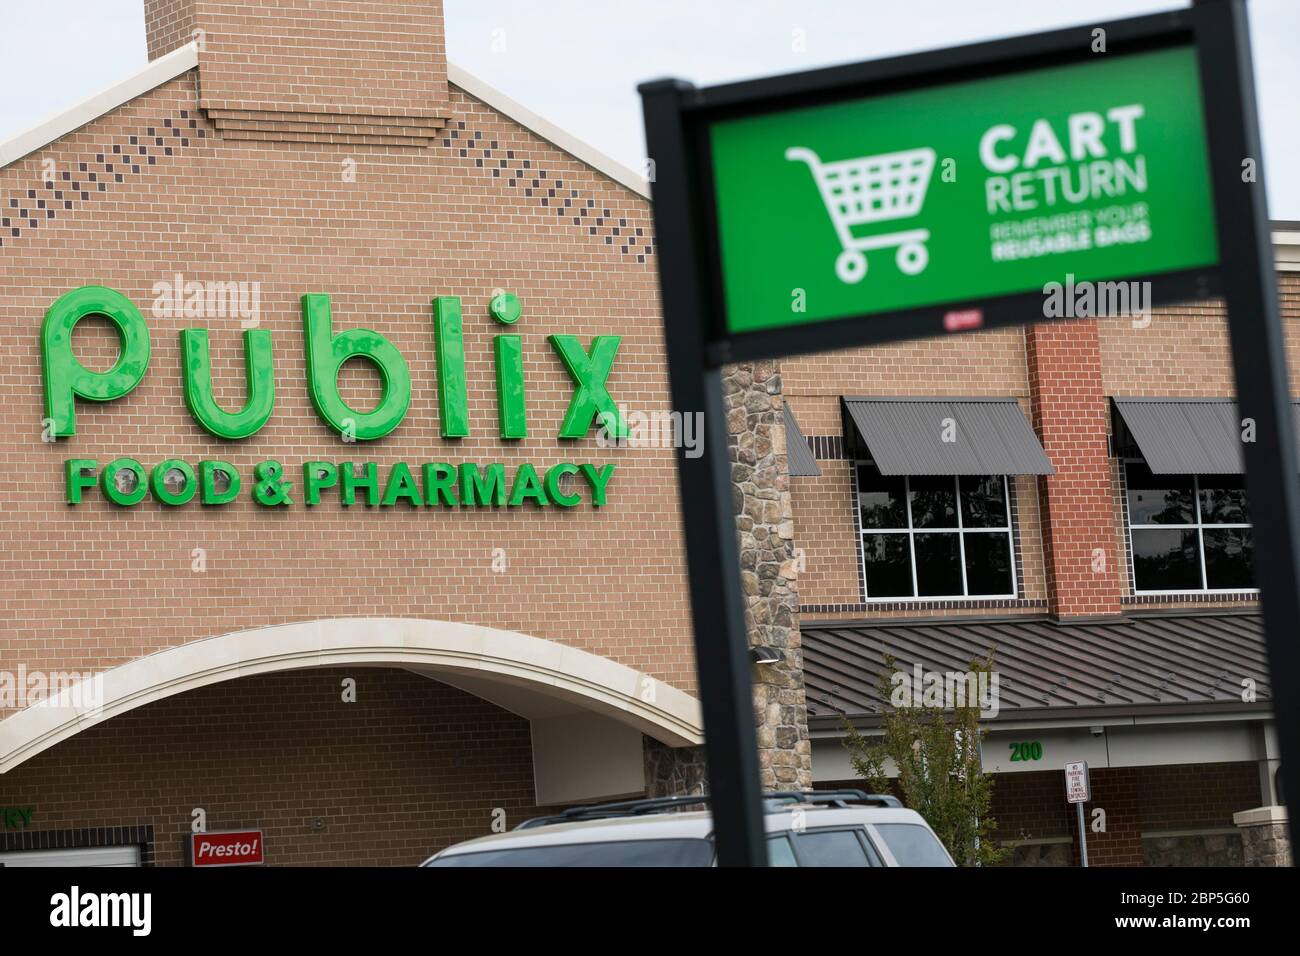 A logo sign outside of a Publix Super Markets retail grocery store location in Midlothian, Virginia on May 13, 2020. Stock Photo